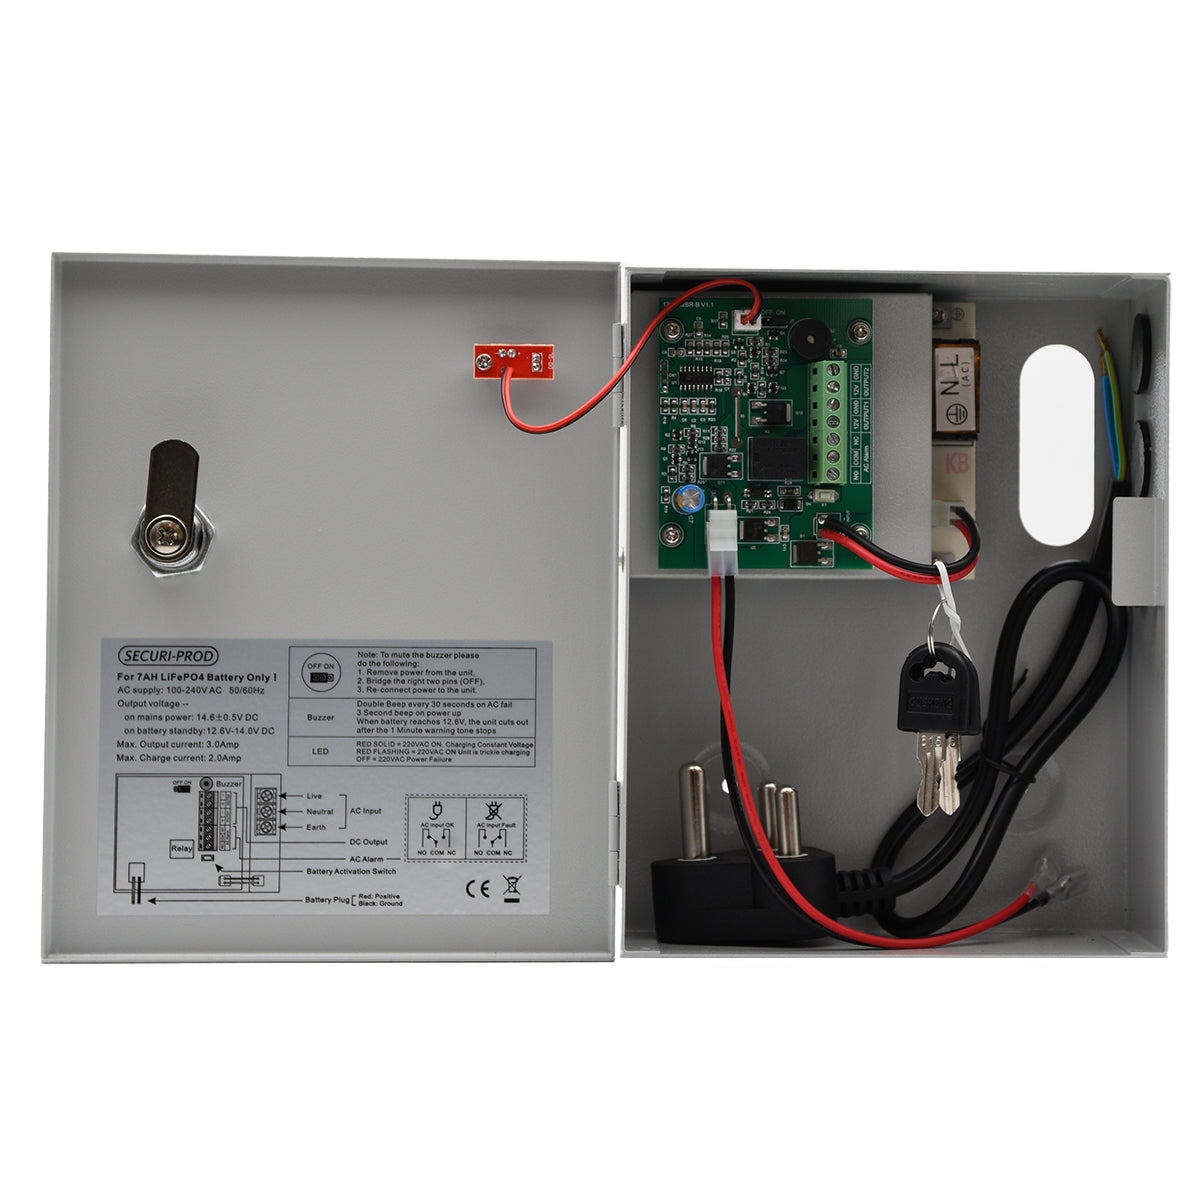 Securi-Prod 3Amp Lithium Battery Backup Power-Supply Inside View PS49-l